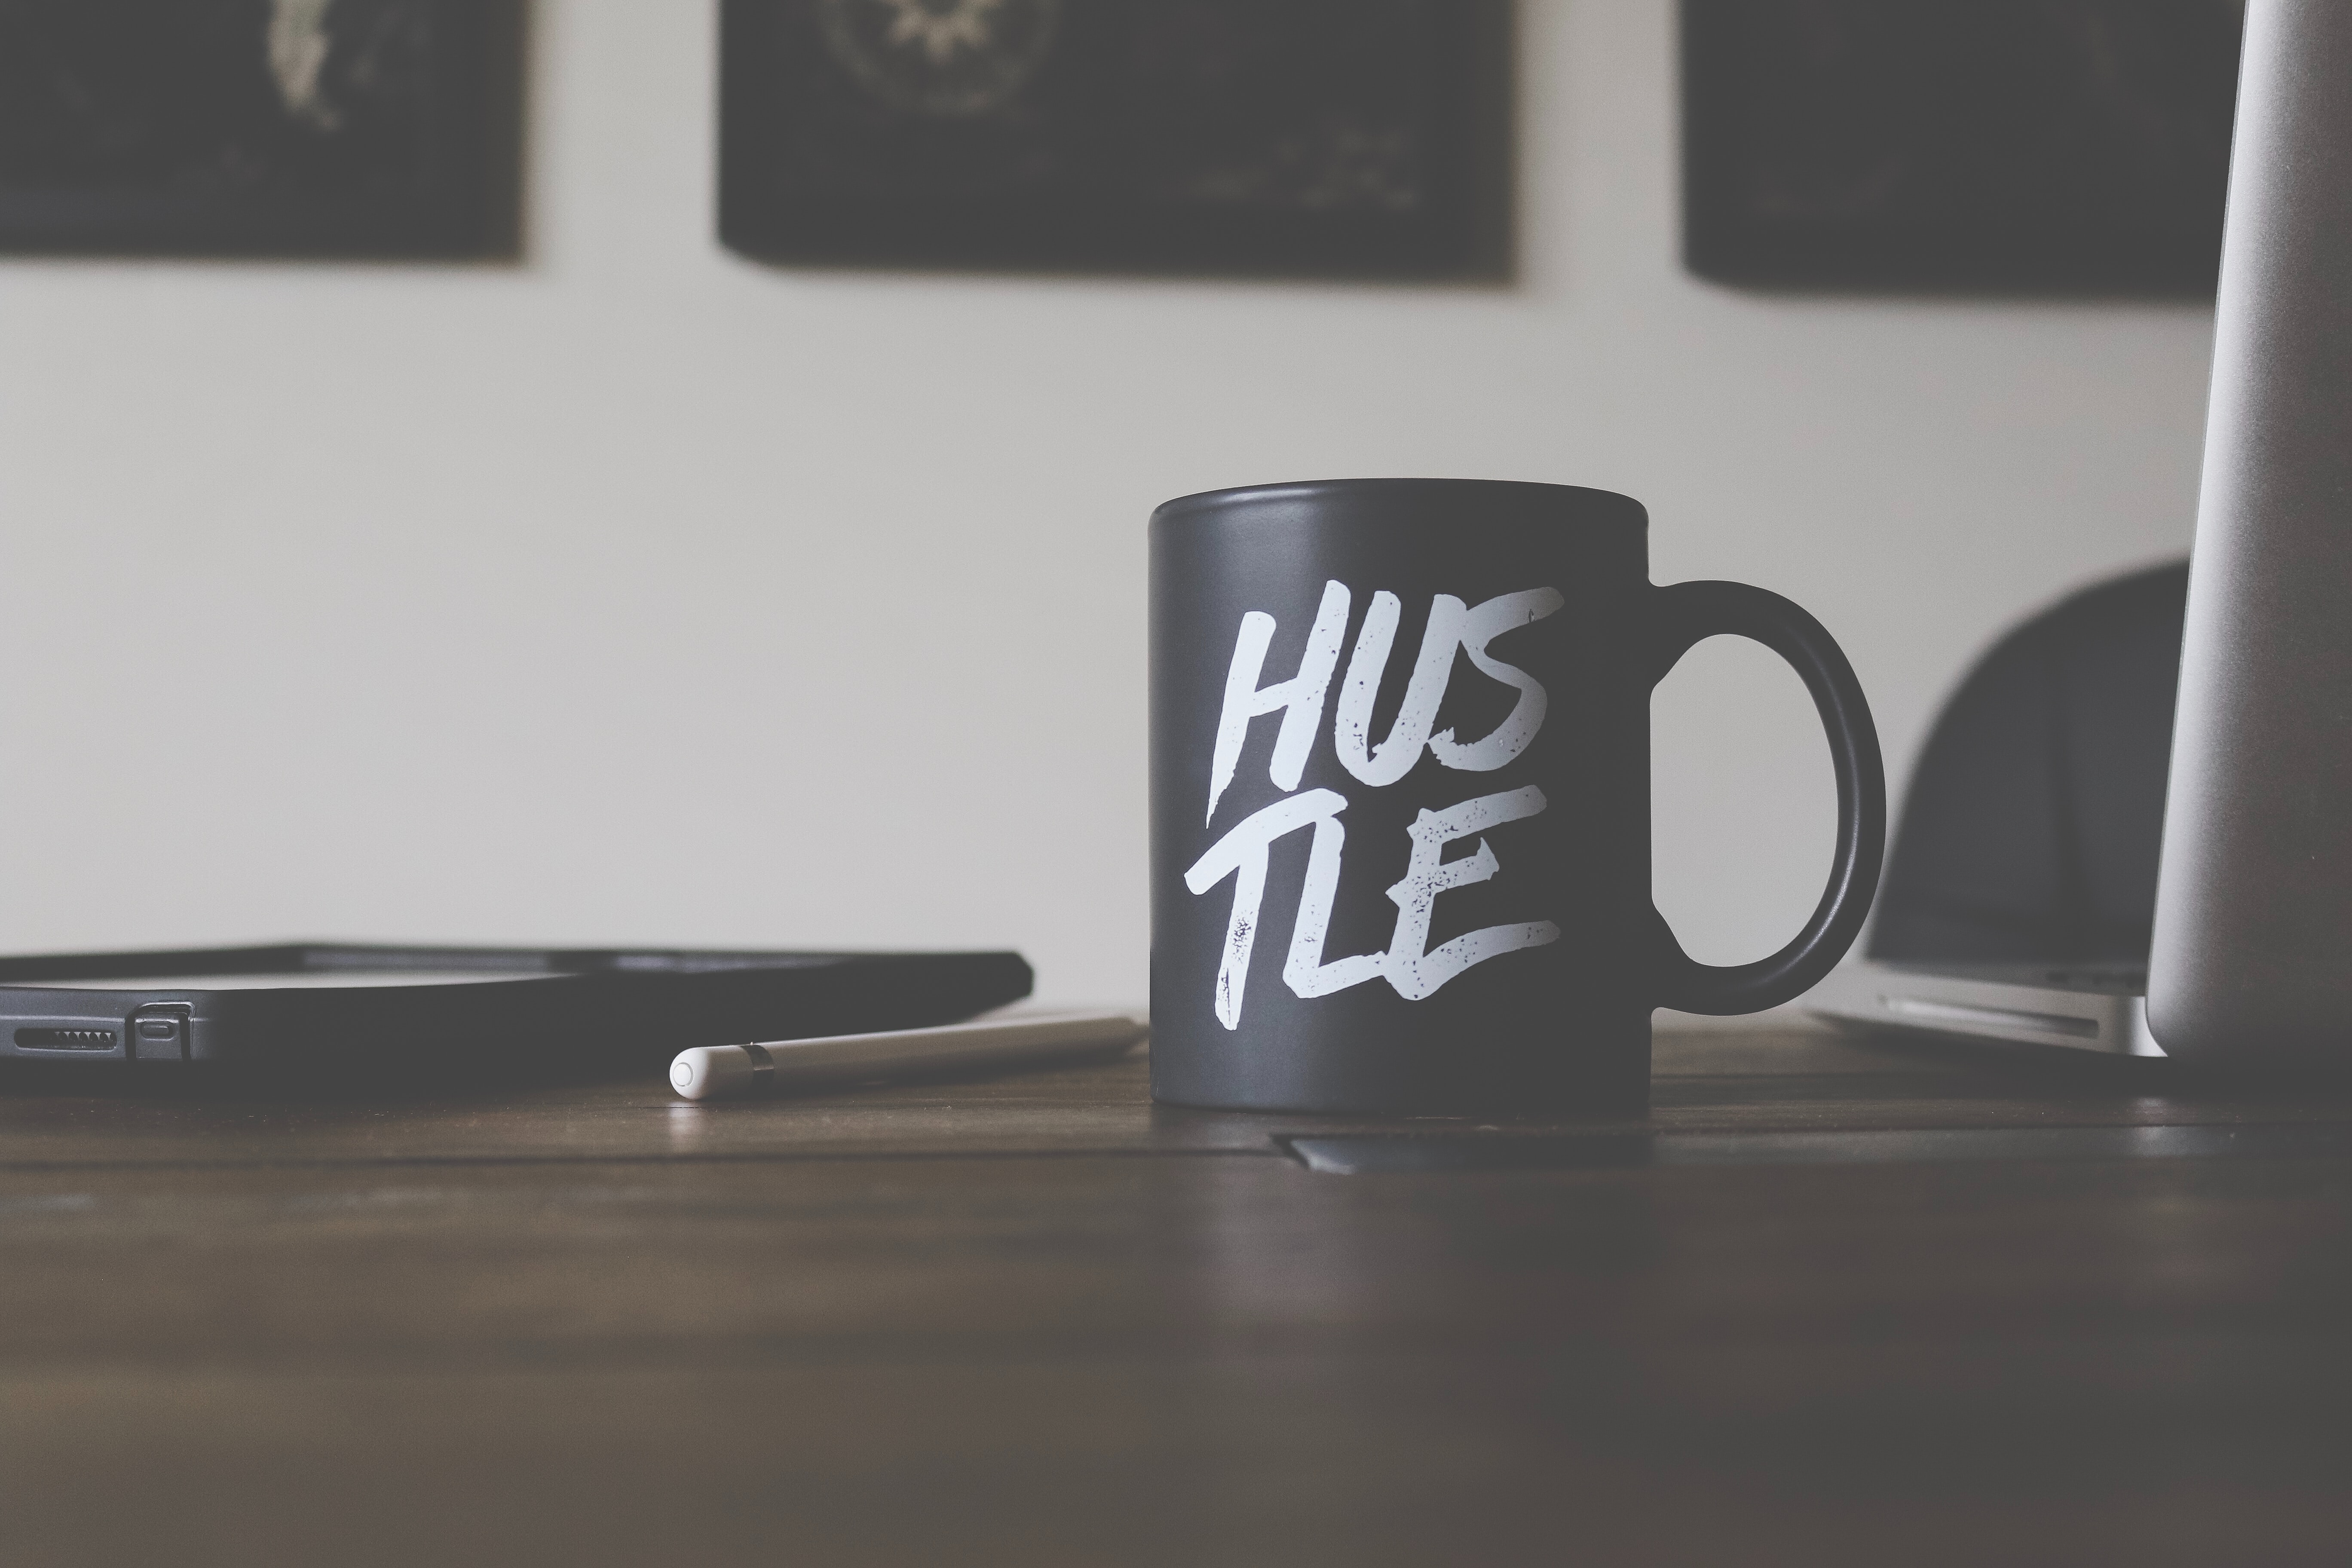 PRT Staffing Industry Areas Expected to Spike in Temp Worker Demand Hustle Coffee Mug on Desk